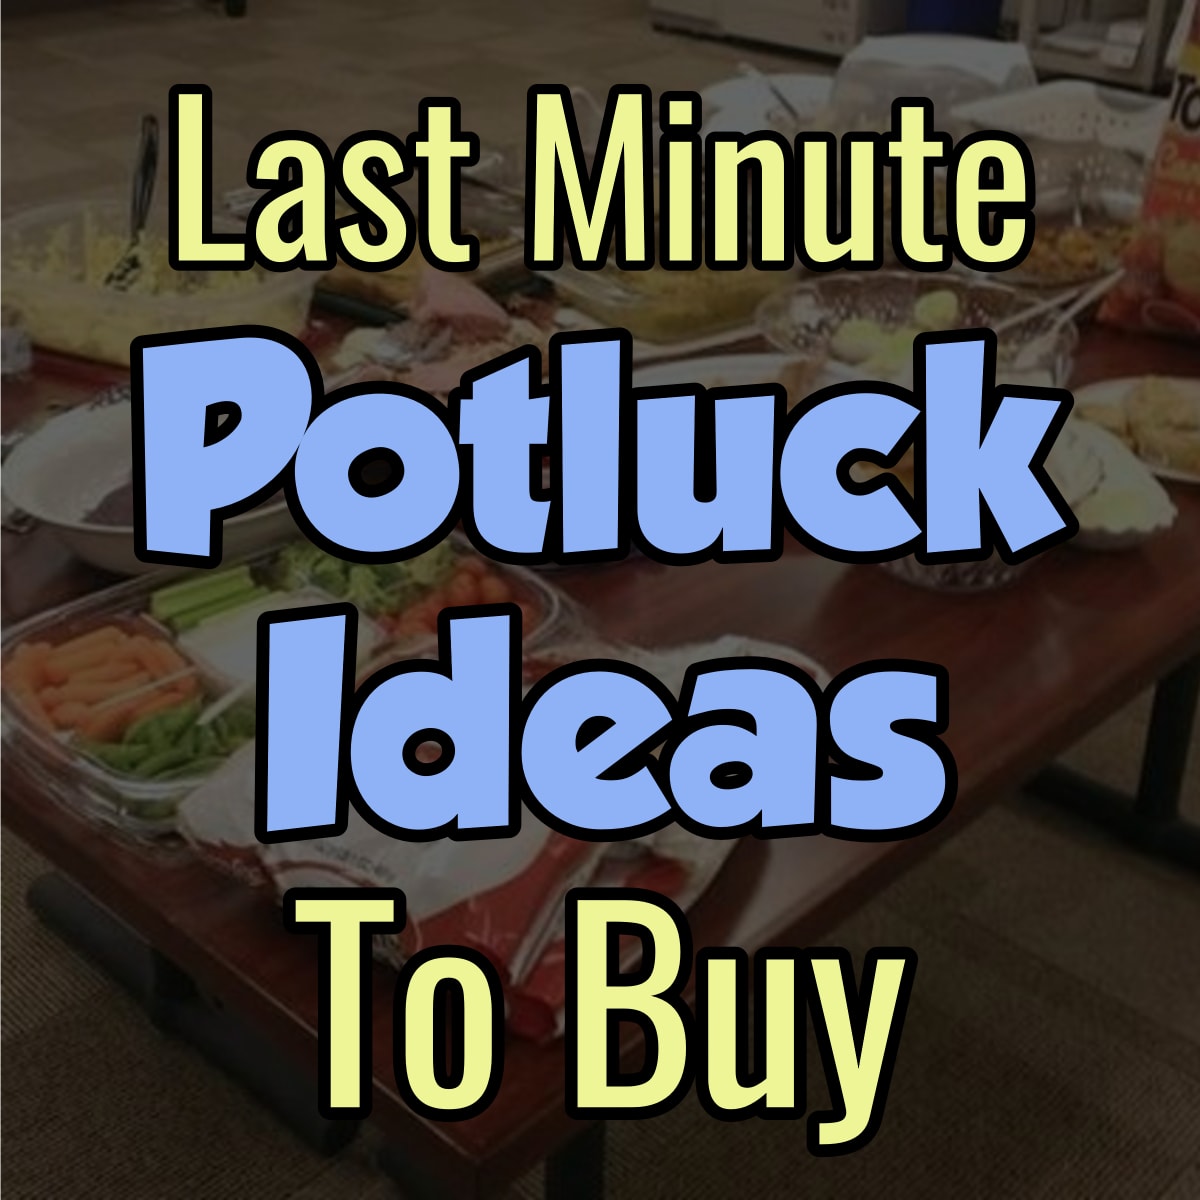 Last Minute Potluck Ideas To Buy - Store bought Potluck Ideas for a work potluck at the office, Holiday potluck or church potluck luncheon